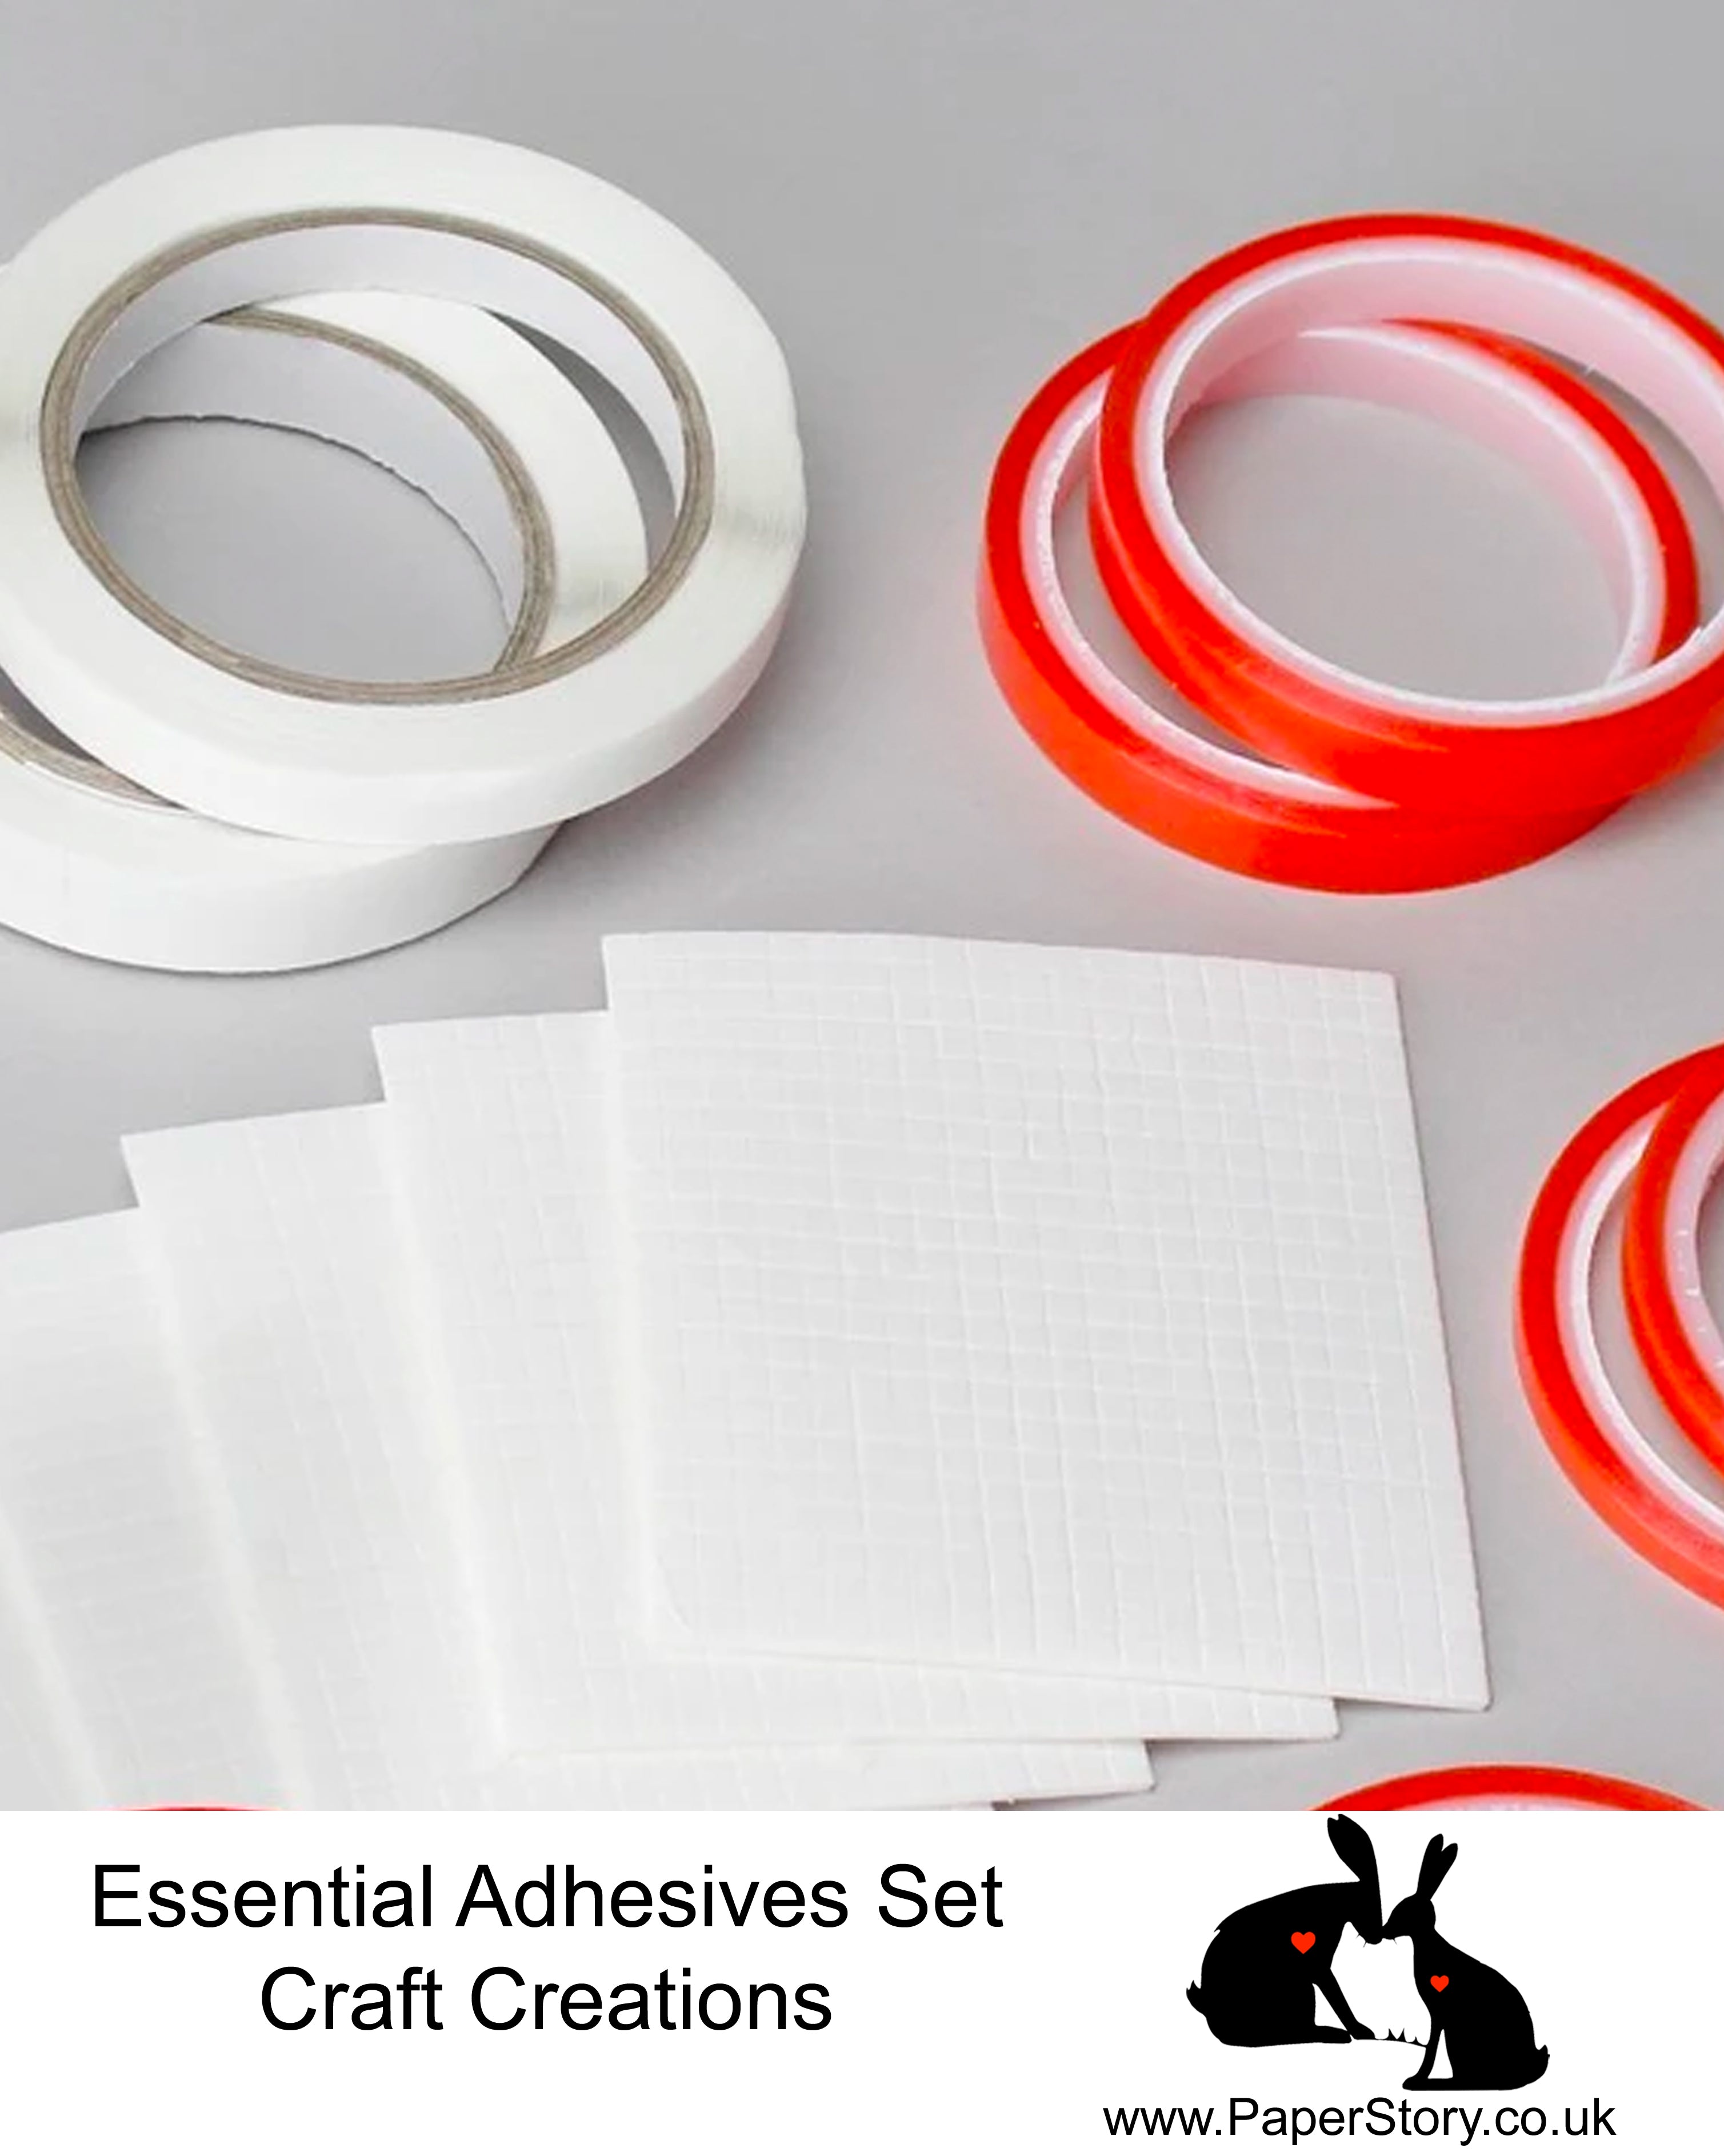 Adhesive Set foam pads, finger lift tape and red tape rolls